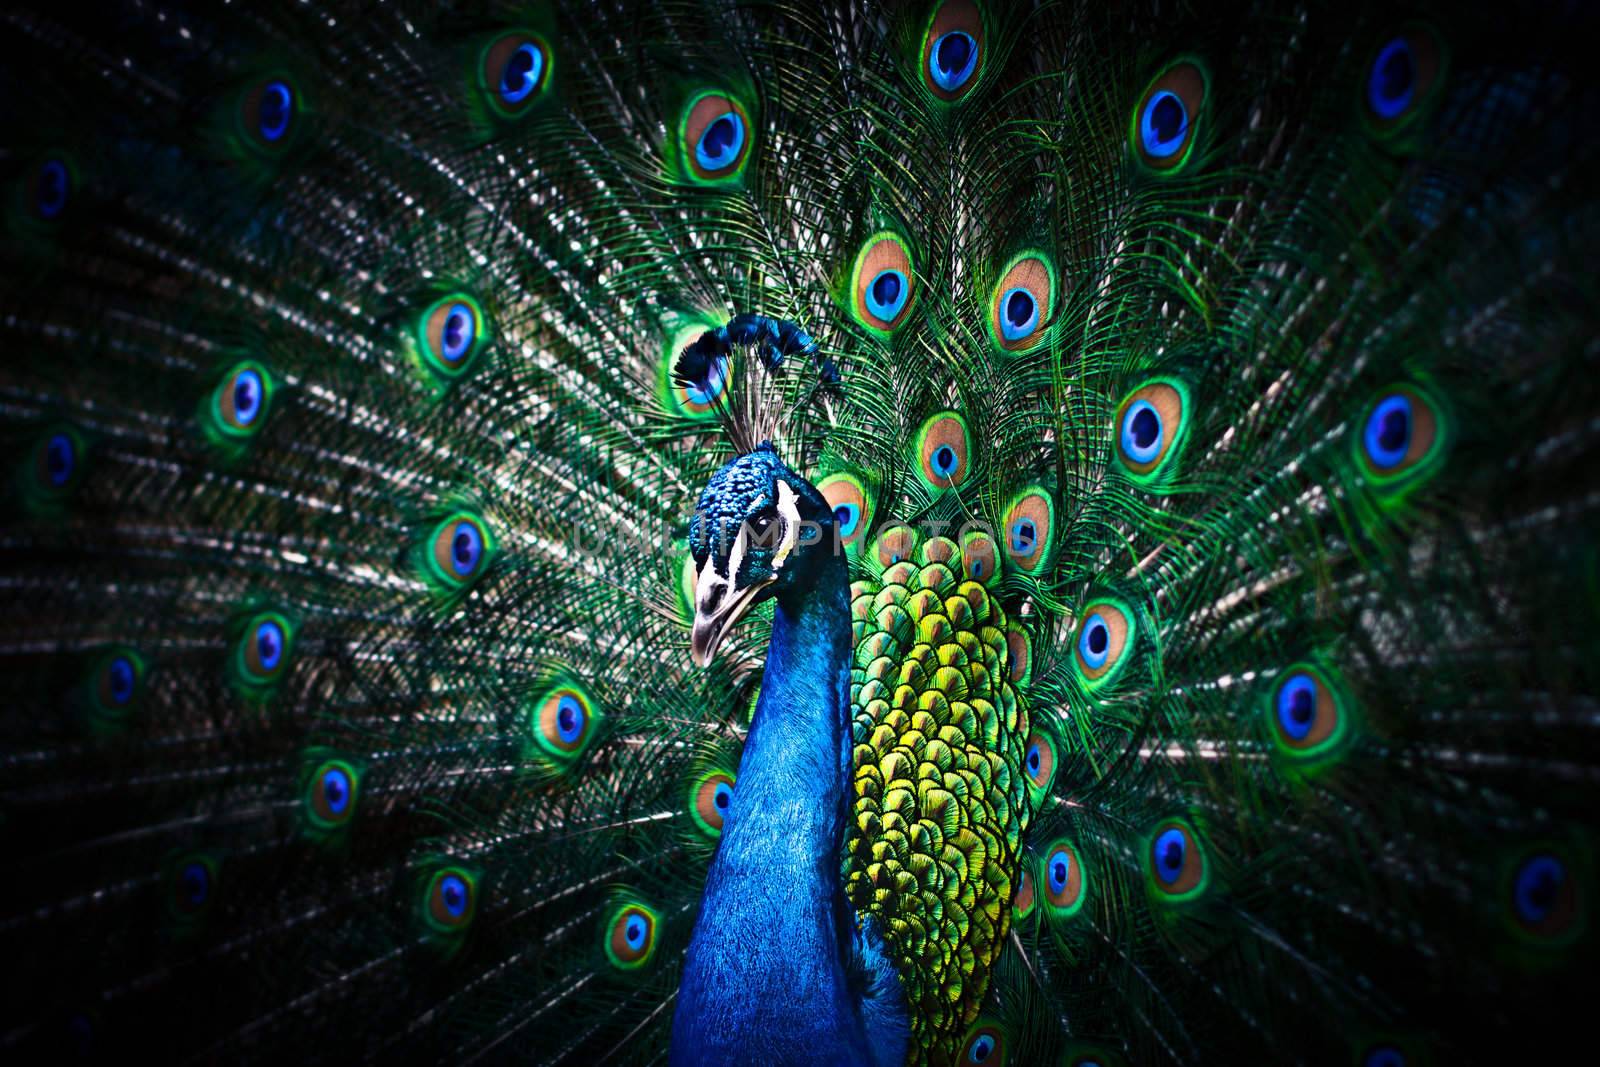 Portrait of Peacock with Feathers Out